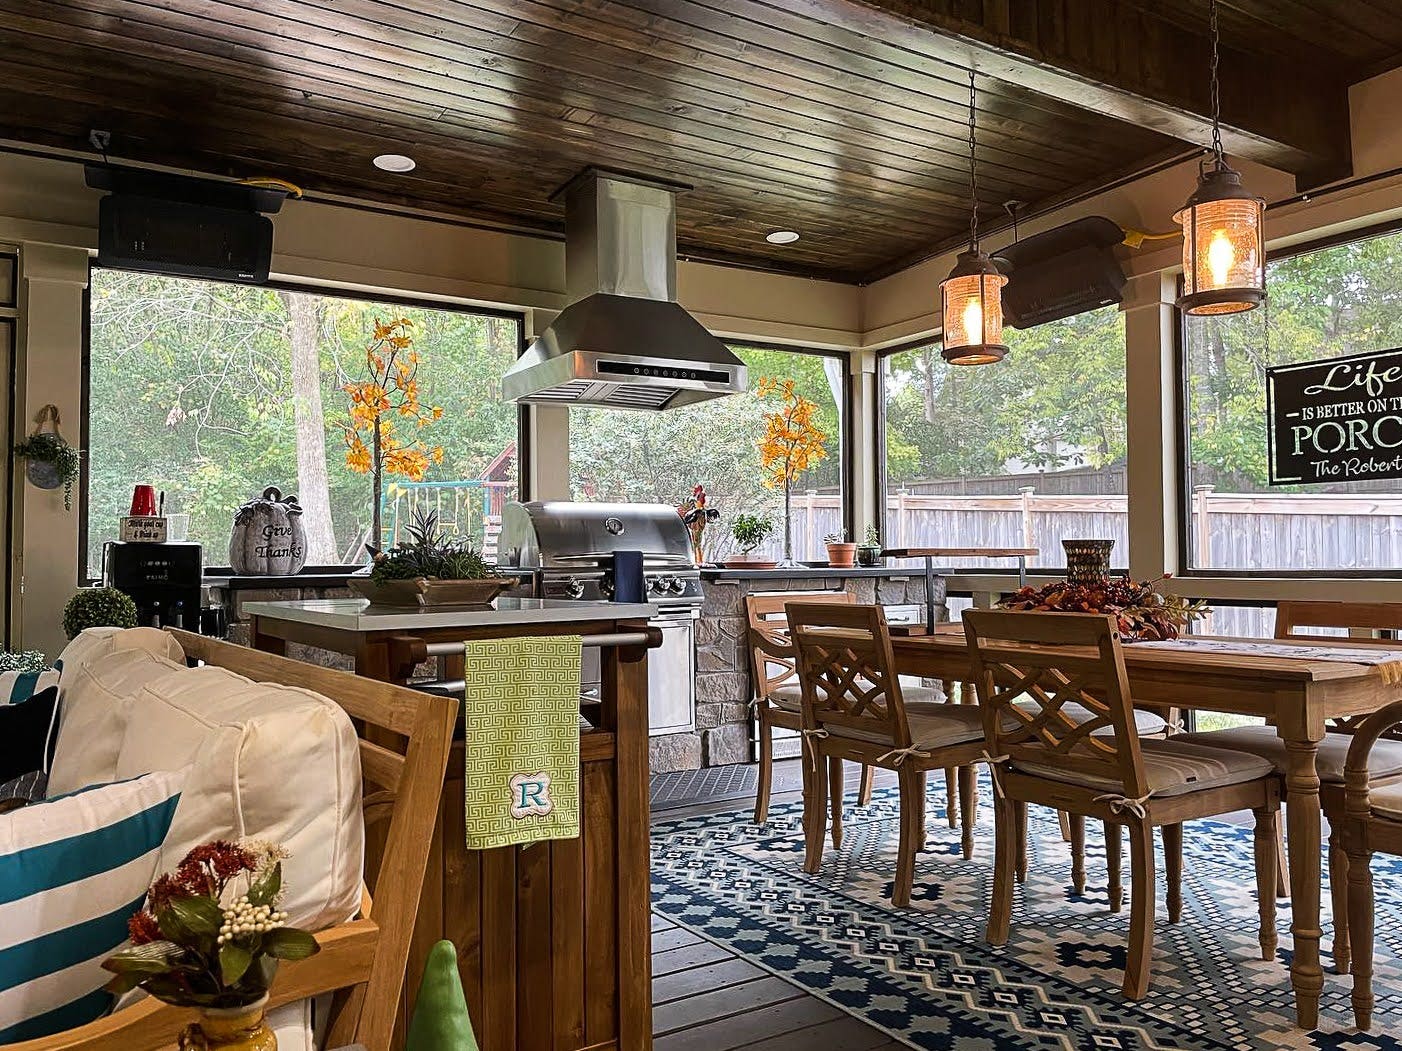 Rustic screened-in porch with a Proline range hood, stylish dining set, and decorative fall touches - prolinerangehoods.com